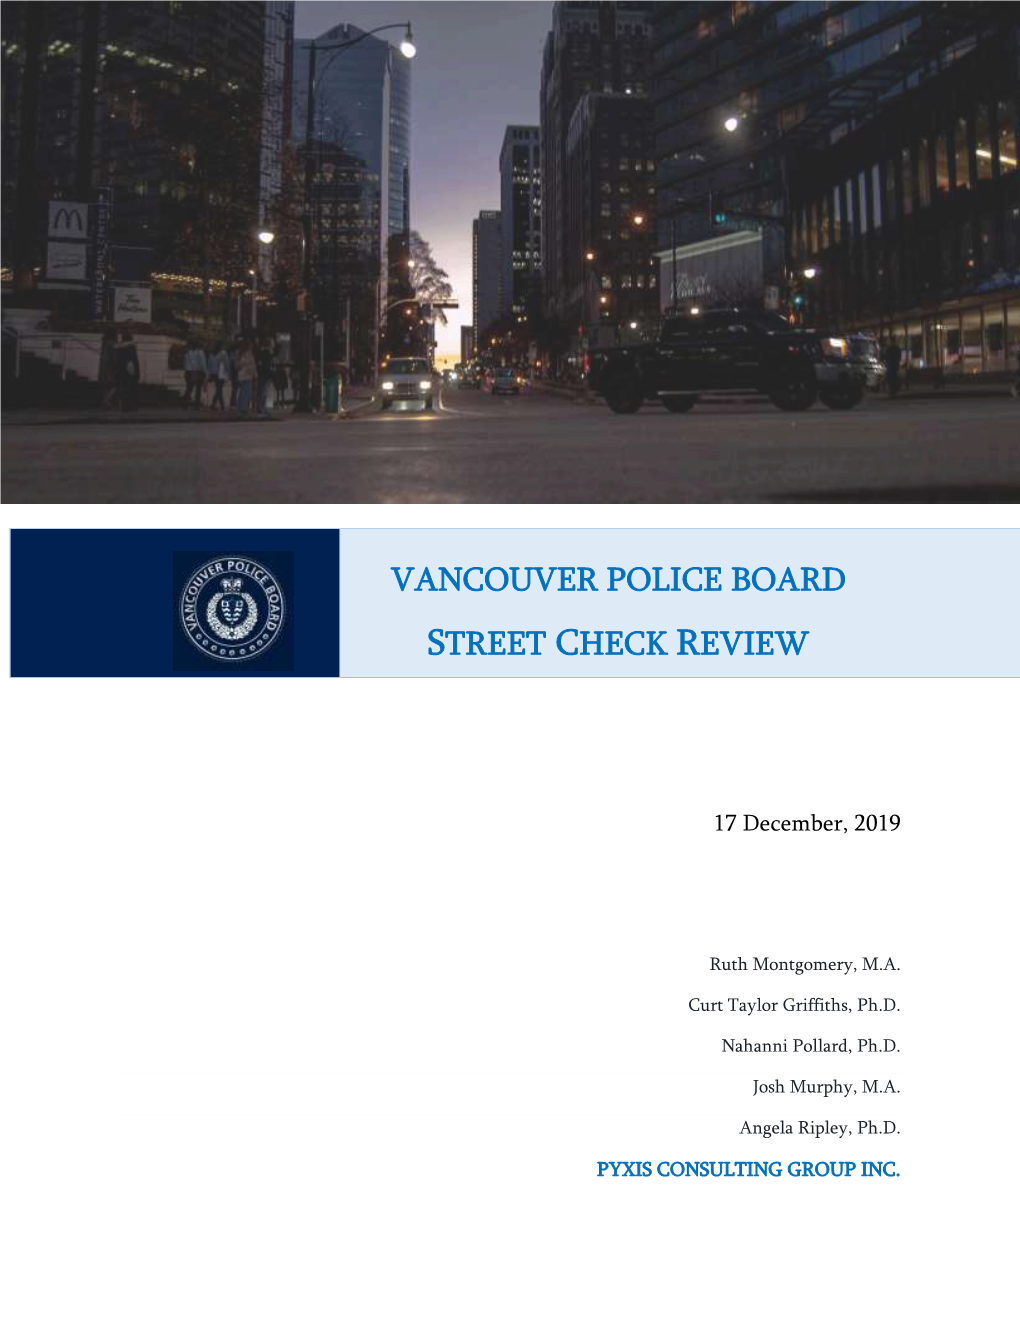 Vancouver Police Board Street Check Review